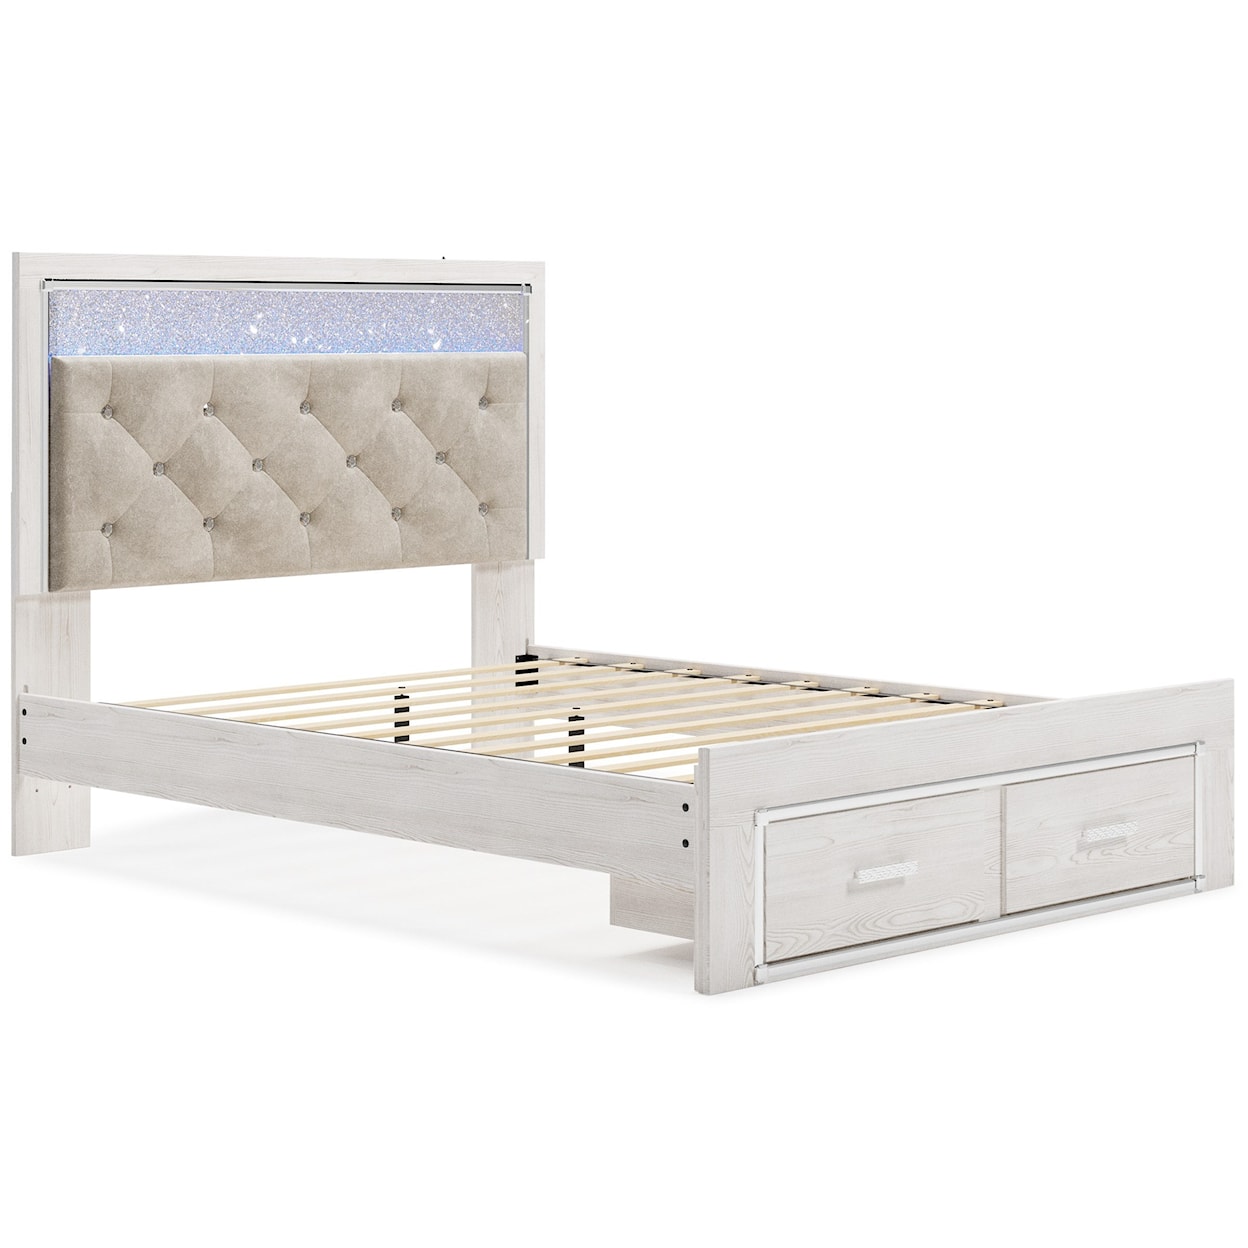 Benchcraft Altyra Queen Storage Bed with Upholstered Headboard